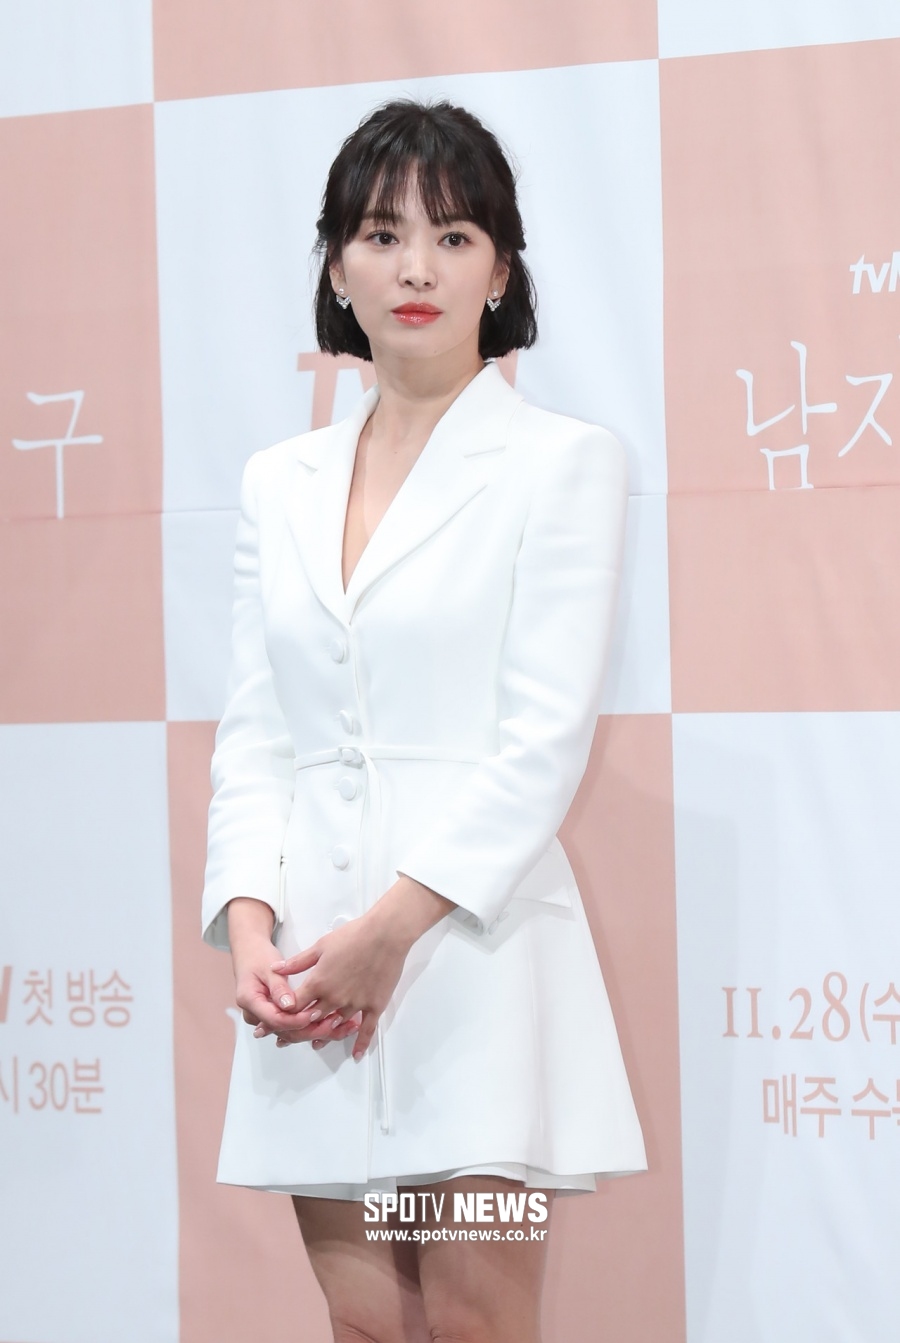 Actor Song Hye-kyo will be on the official list for the first time in Korea after his divorce.Song Hye-kyo will attend the event at 2 pm on the 17th at the Avenue Ell, the head office of Lotte Department Store in Sogong-dong, Jung-gu, Seoul.On this day, Song Hye-kyo attends a luxury jewelery brand photo call, which is the ambassador to Asia, and boasts an elegant charm.This is the first time that Song has appeared in the domestic public since her divorce from Song Jung-ki in July. Song Hye-kyo has focused on overseas activities since the divorce settlement was established in July.Song Hye-kyo, who has boasted more beautiful beauty around China and Monaco, is also interested in what he will look like in his long-time domestic official appearance.Song also resumed SNS activities that had recently stopped due to divorce, and released several photos of her photos on her Instagram page, revealing her recent welcome to fans.In addition, Song Hye-kyos Fever Day was reported to have taken short-term art school courses in New York, USA, where he visited Fashion Week.=